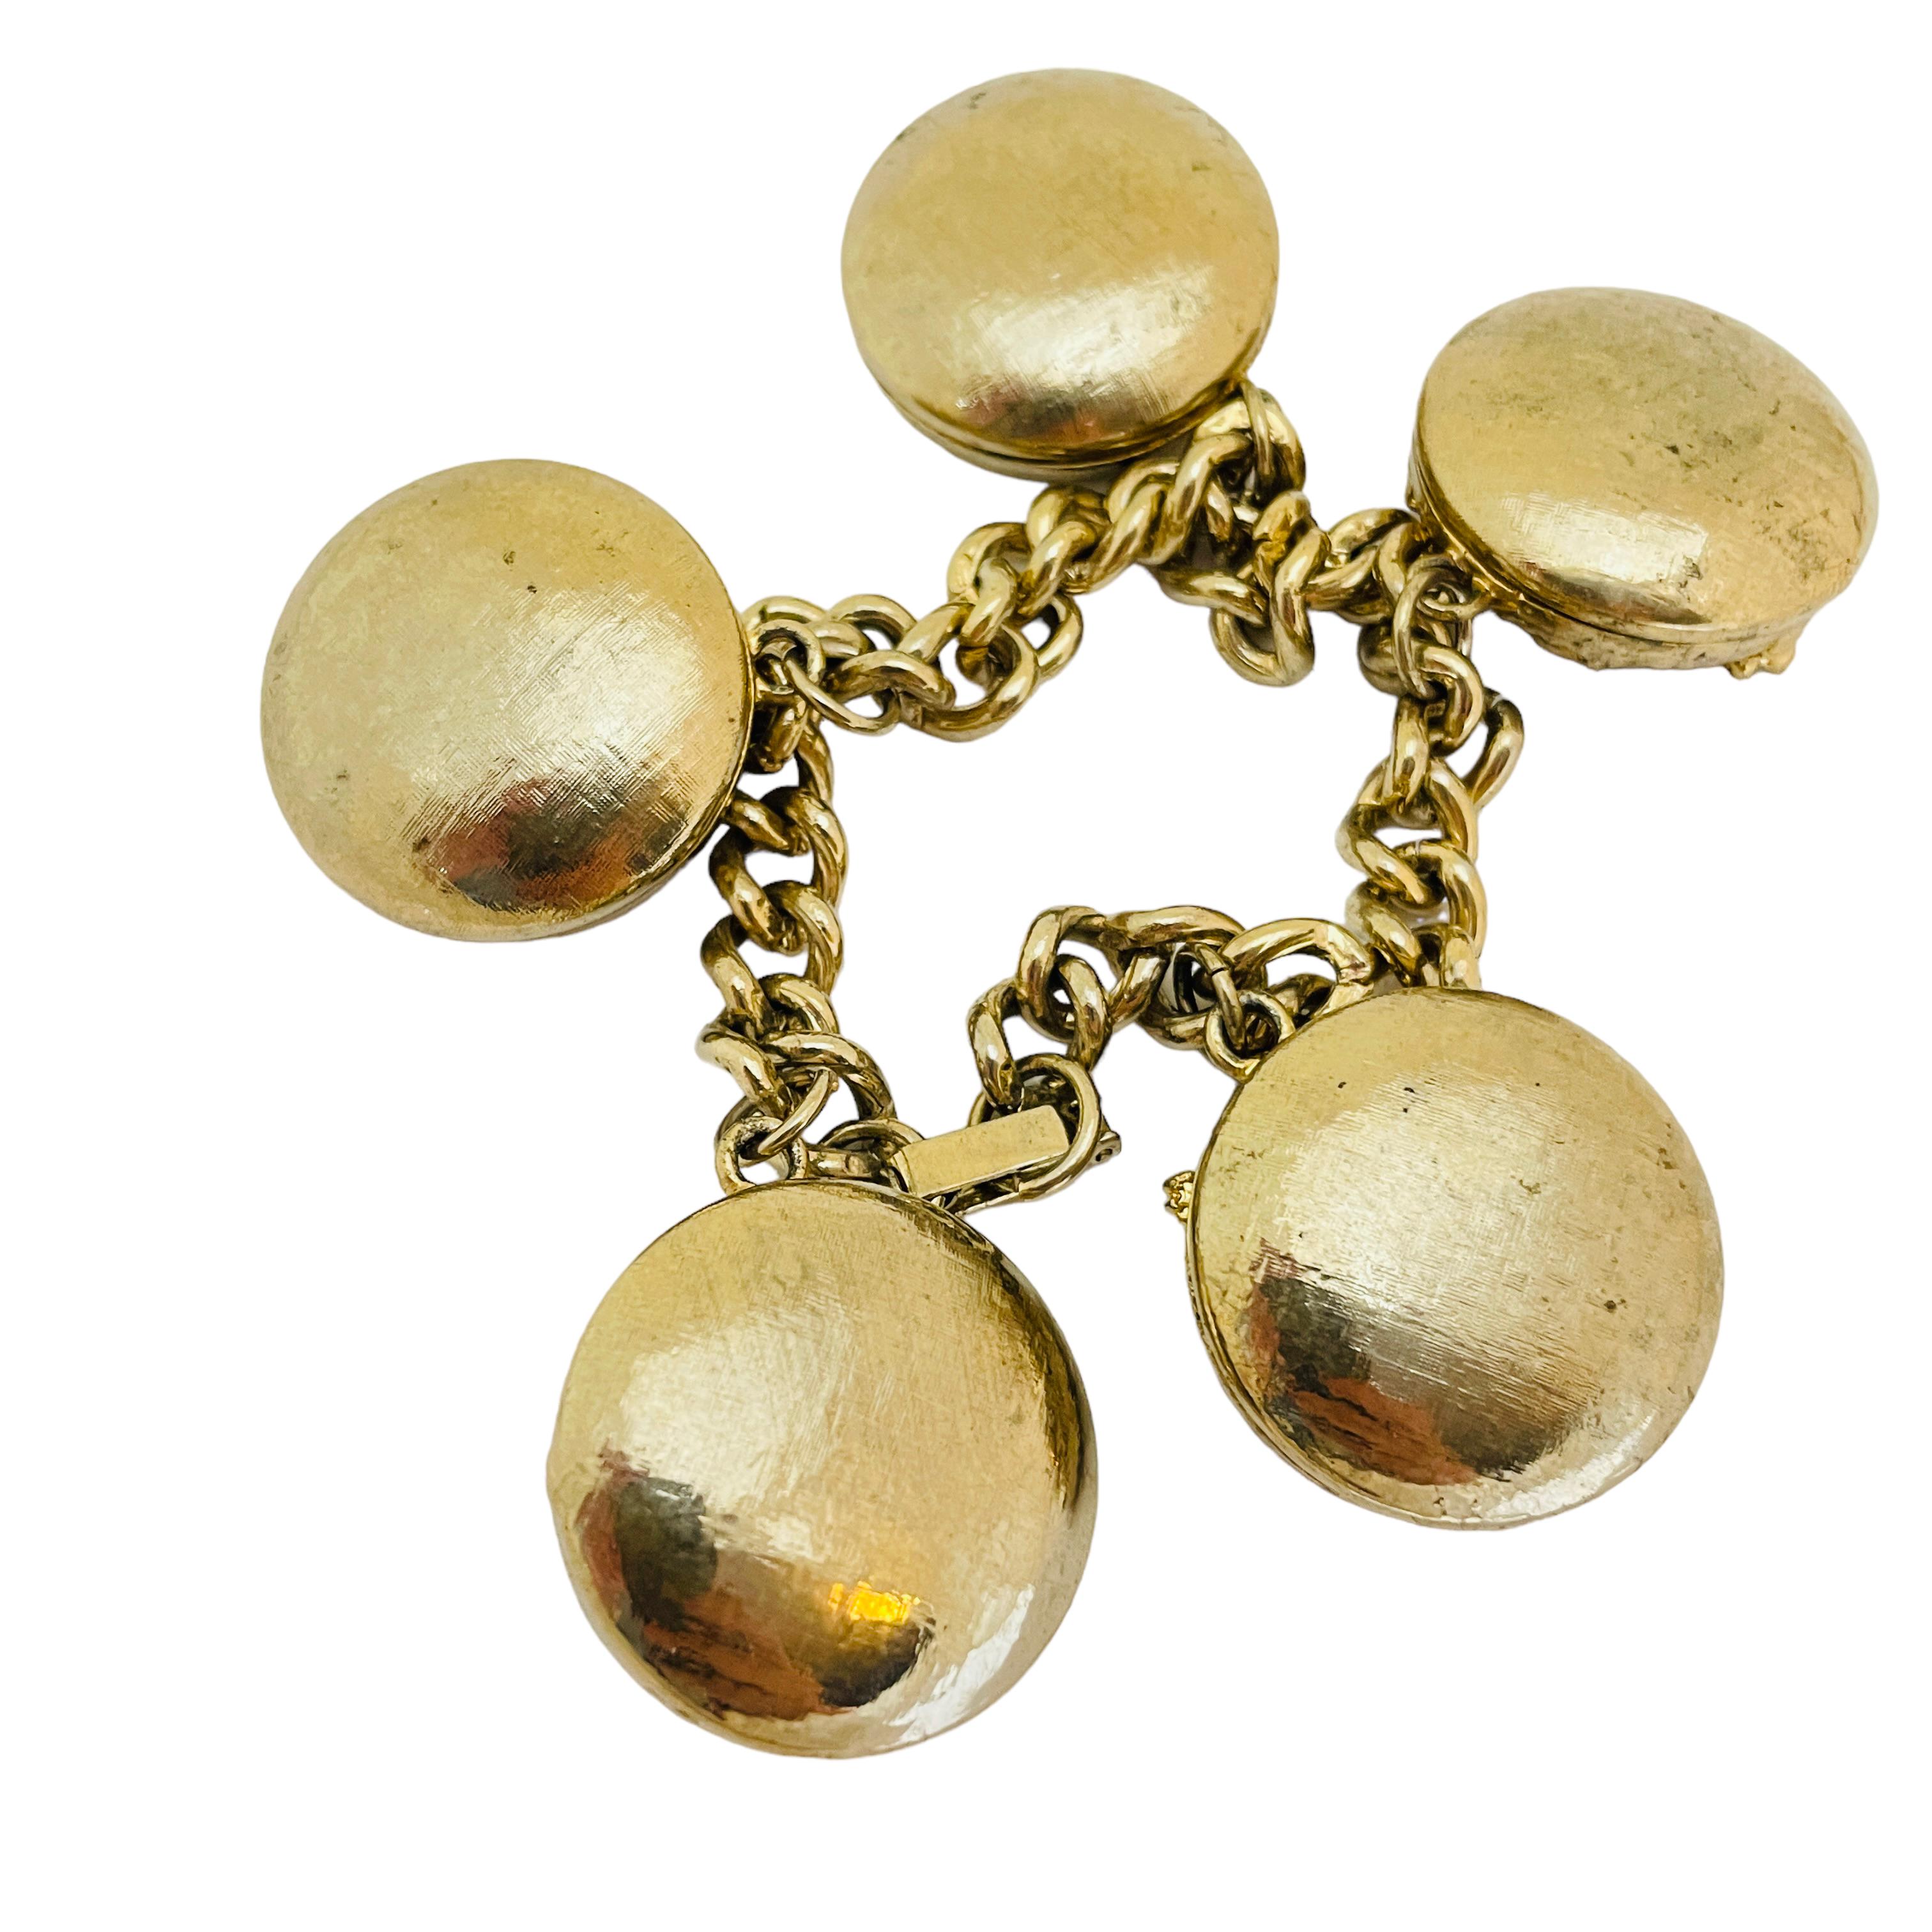 Vintage gold tone charm chain link bracelet In Good Condition For Sale In Palos Hills, IL